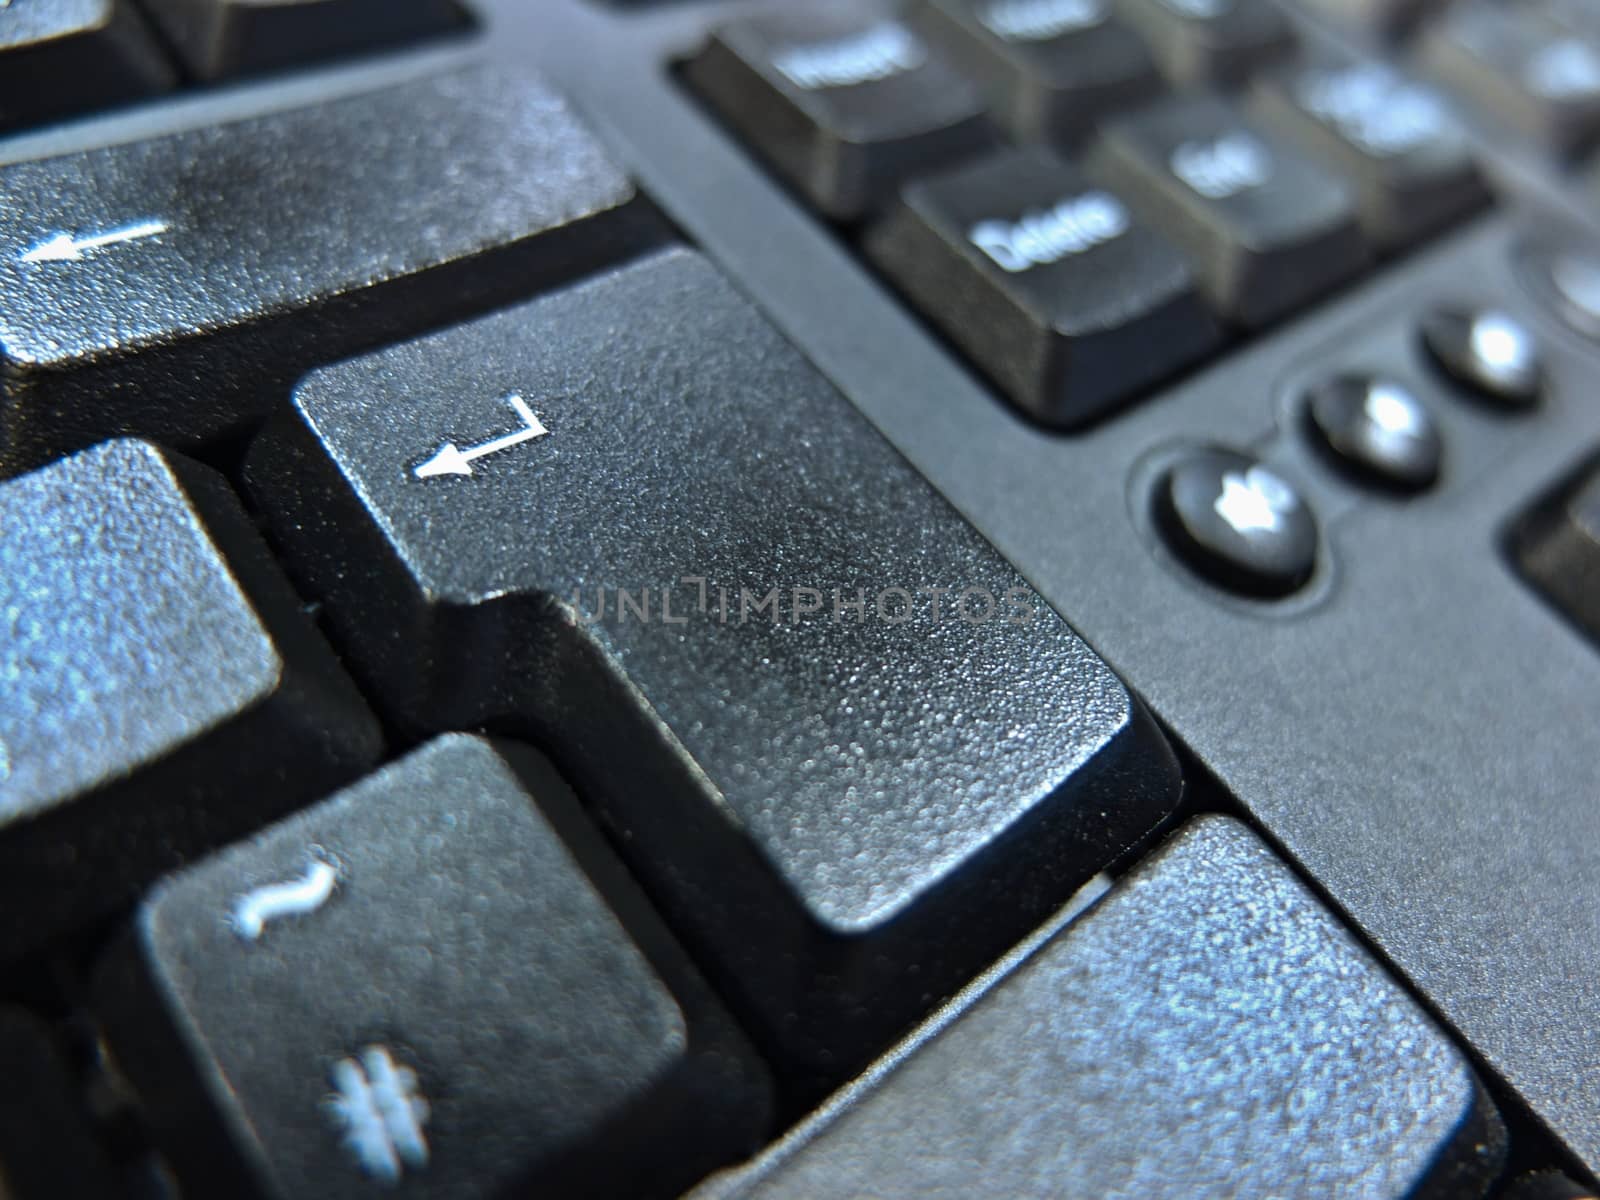 Large Enter button on the keyboard closeup